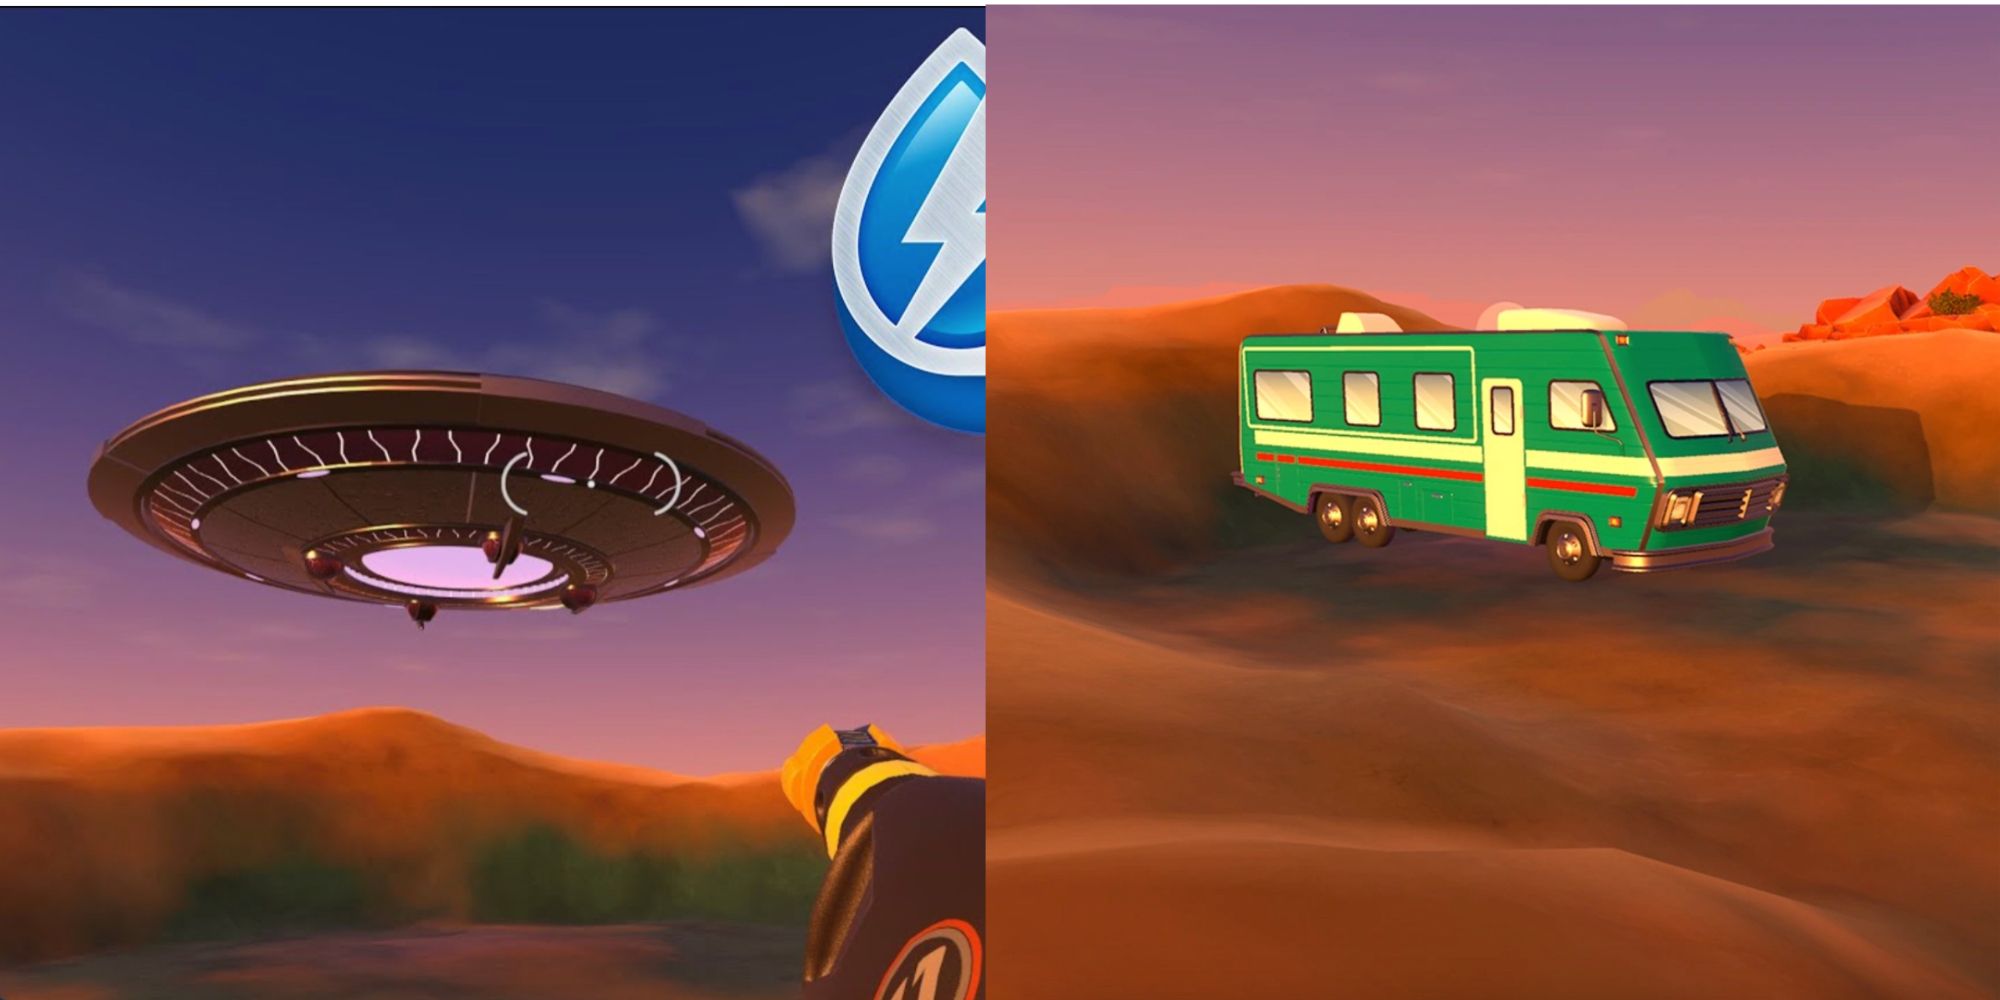 The UFO takes off on the left while it remains in its cloaked RV appearance on the right.